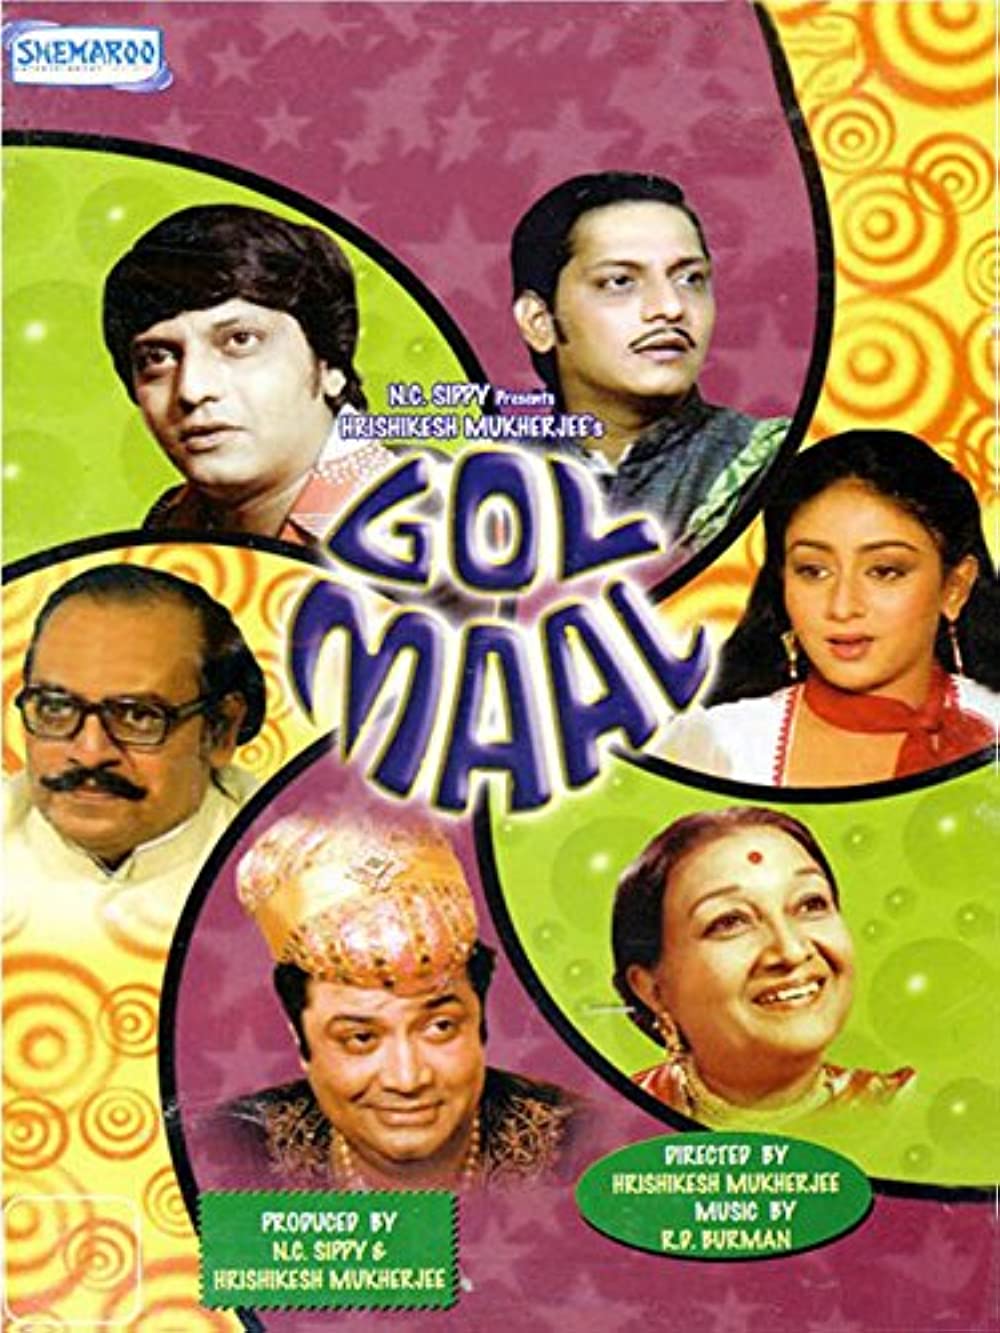 35 Old But Gold Hindi Comedy Movies Of All Time: Bollywood, Netflix, Amazon  Prime